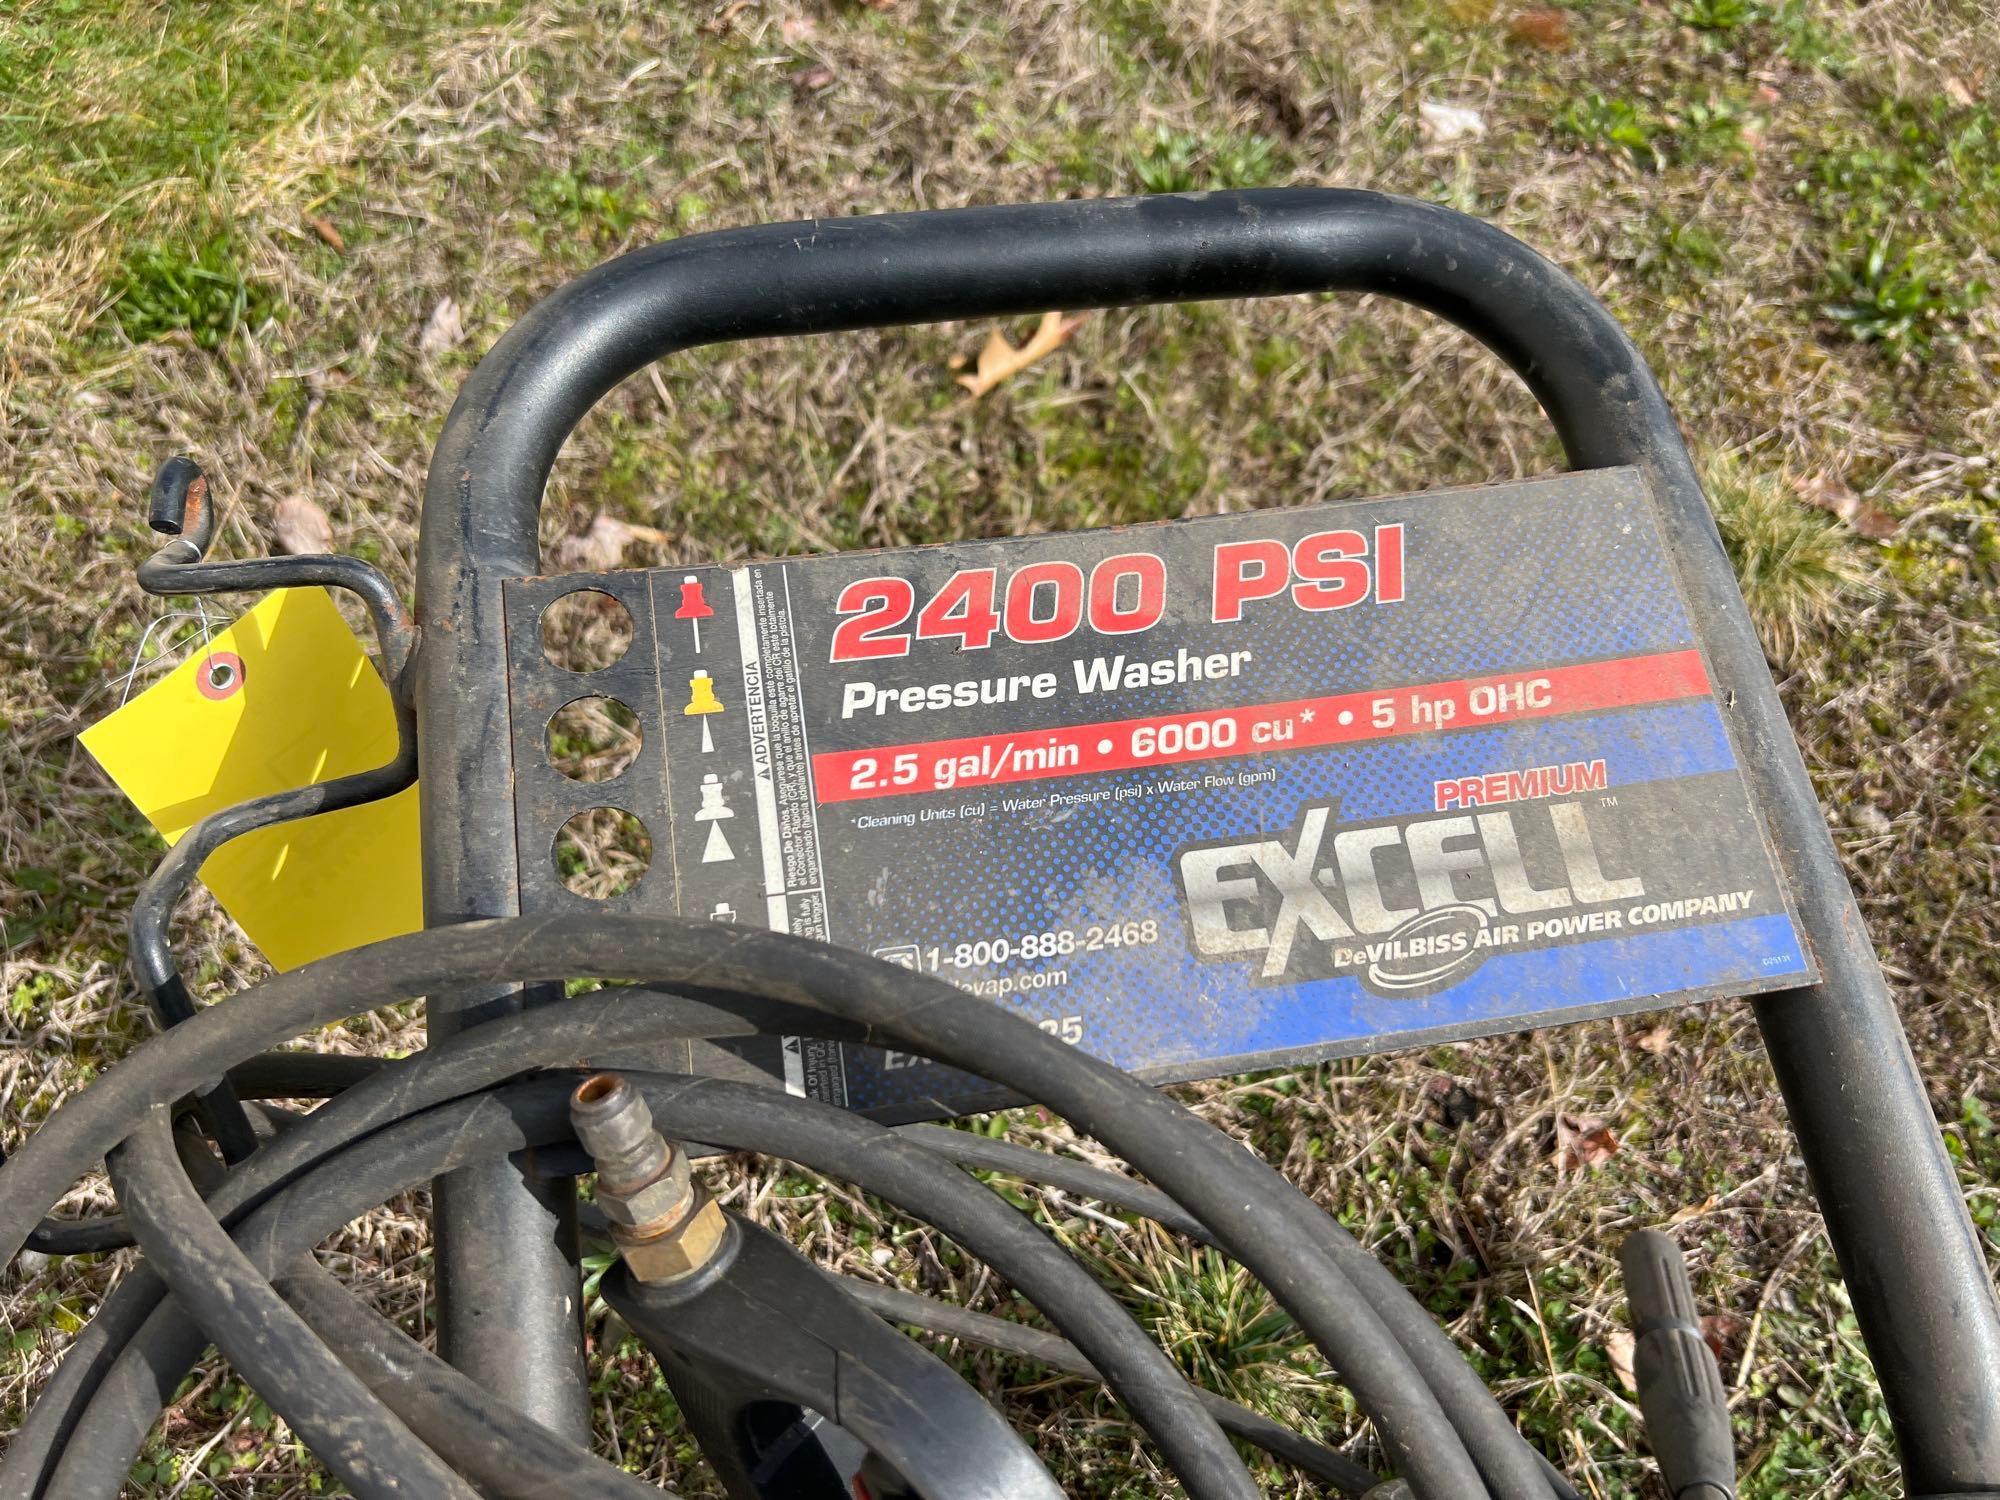 Premium Excell 2400 PSI Pressure Washer